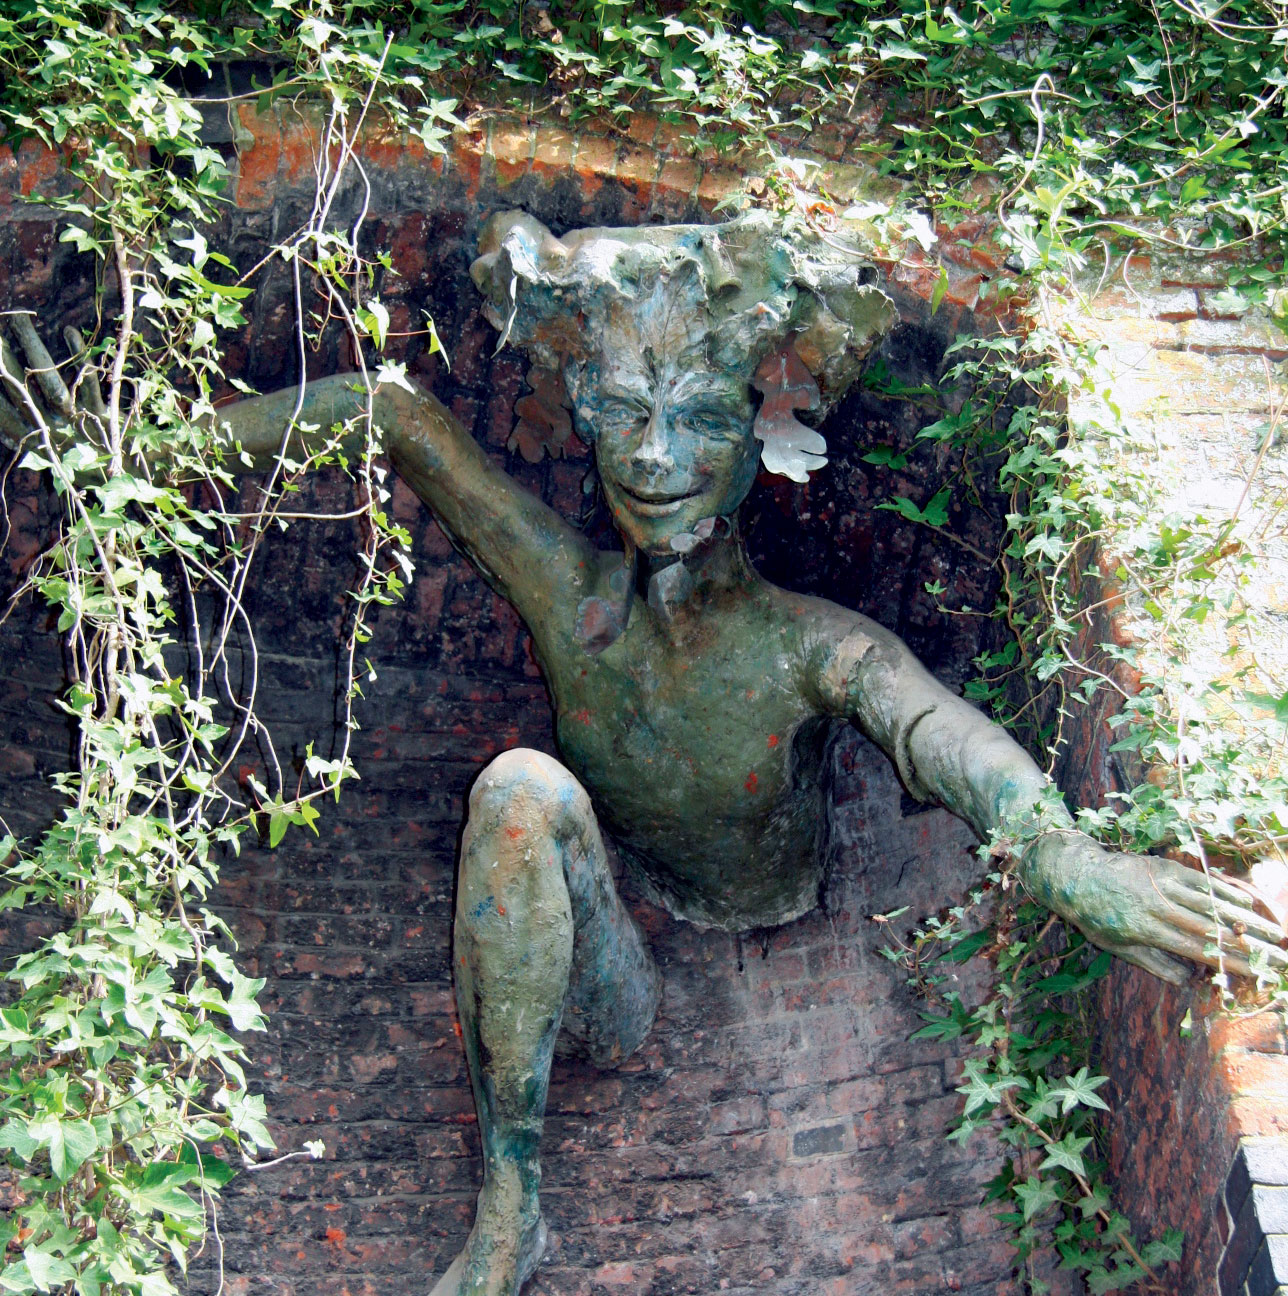 The Spriggan can be found near the overhead footbridge from Vicarage Path at the end of the Crouch End platforms.